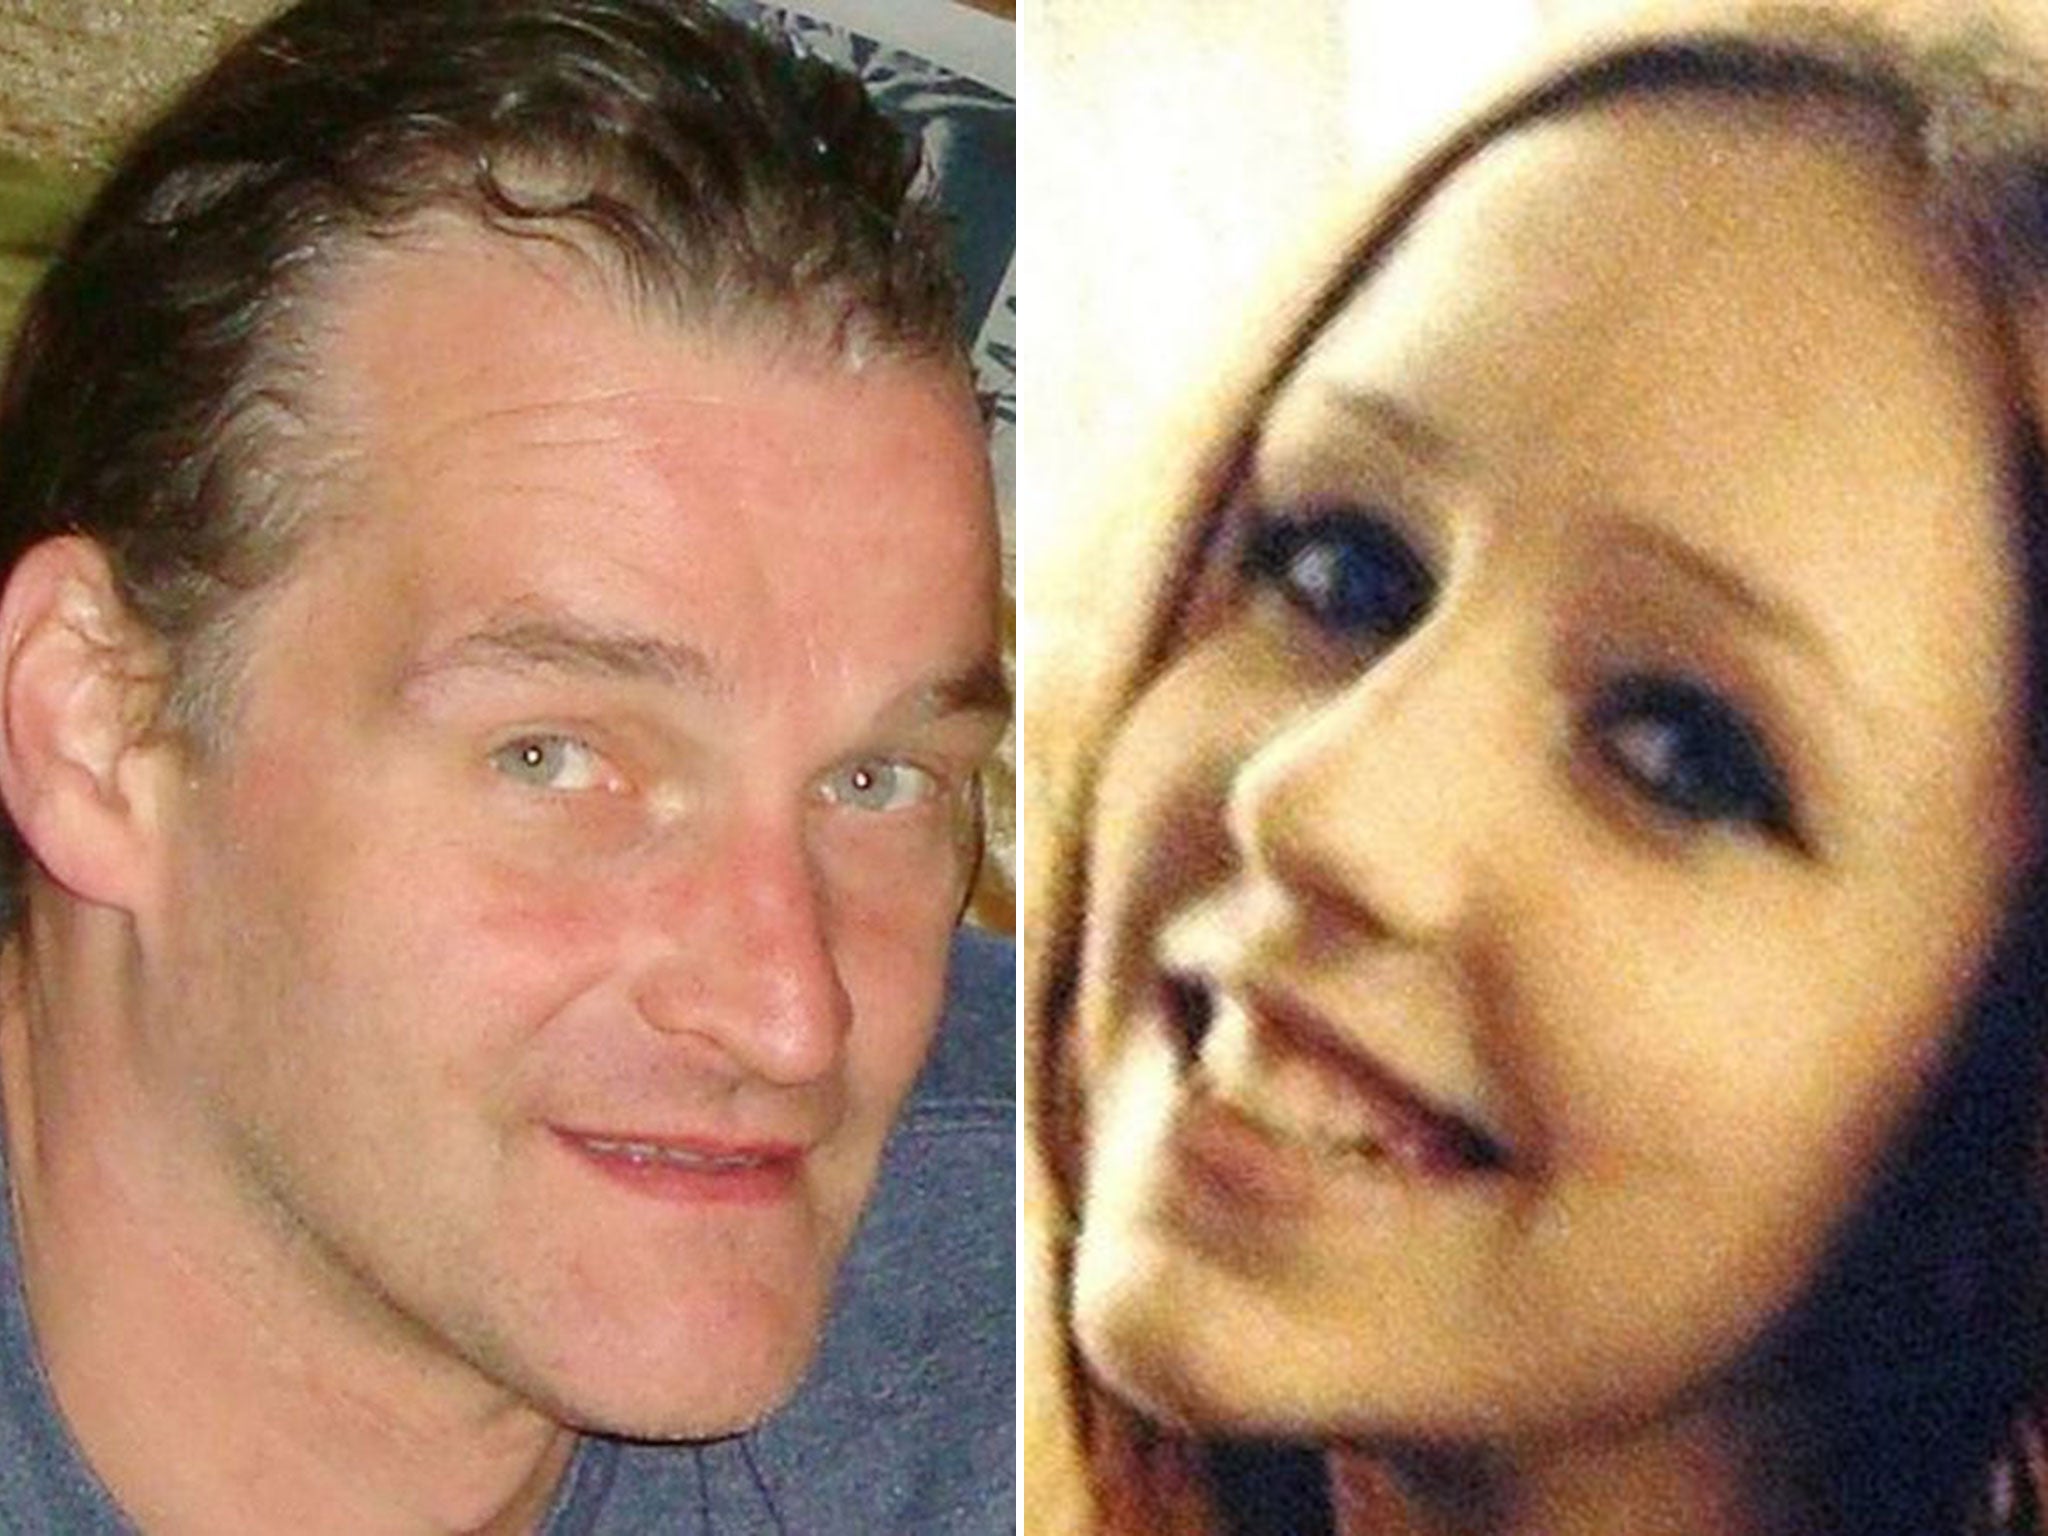 Latvian Arnis Zalkalns was named as the prime suspect in the investigation into the murder of teenager Alice Gross